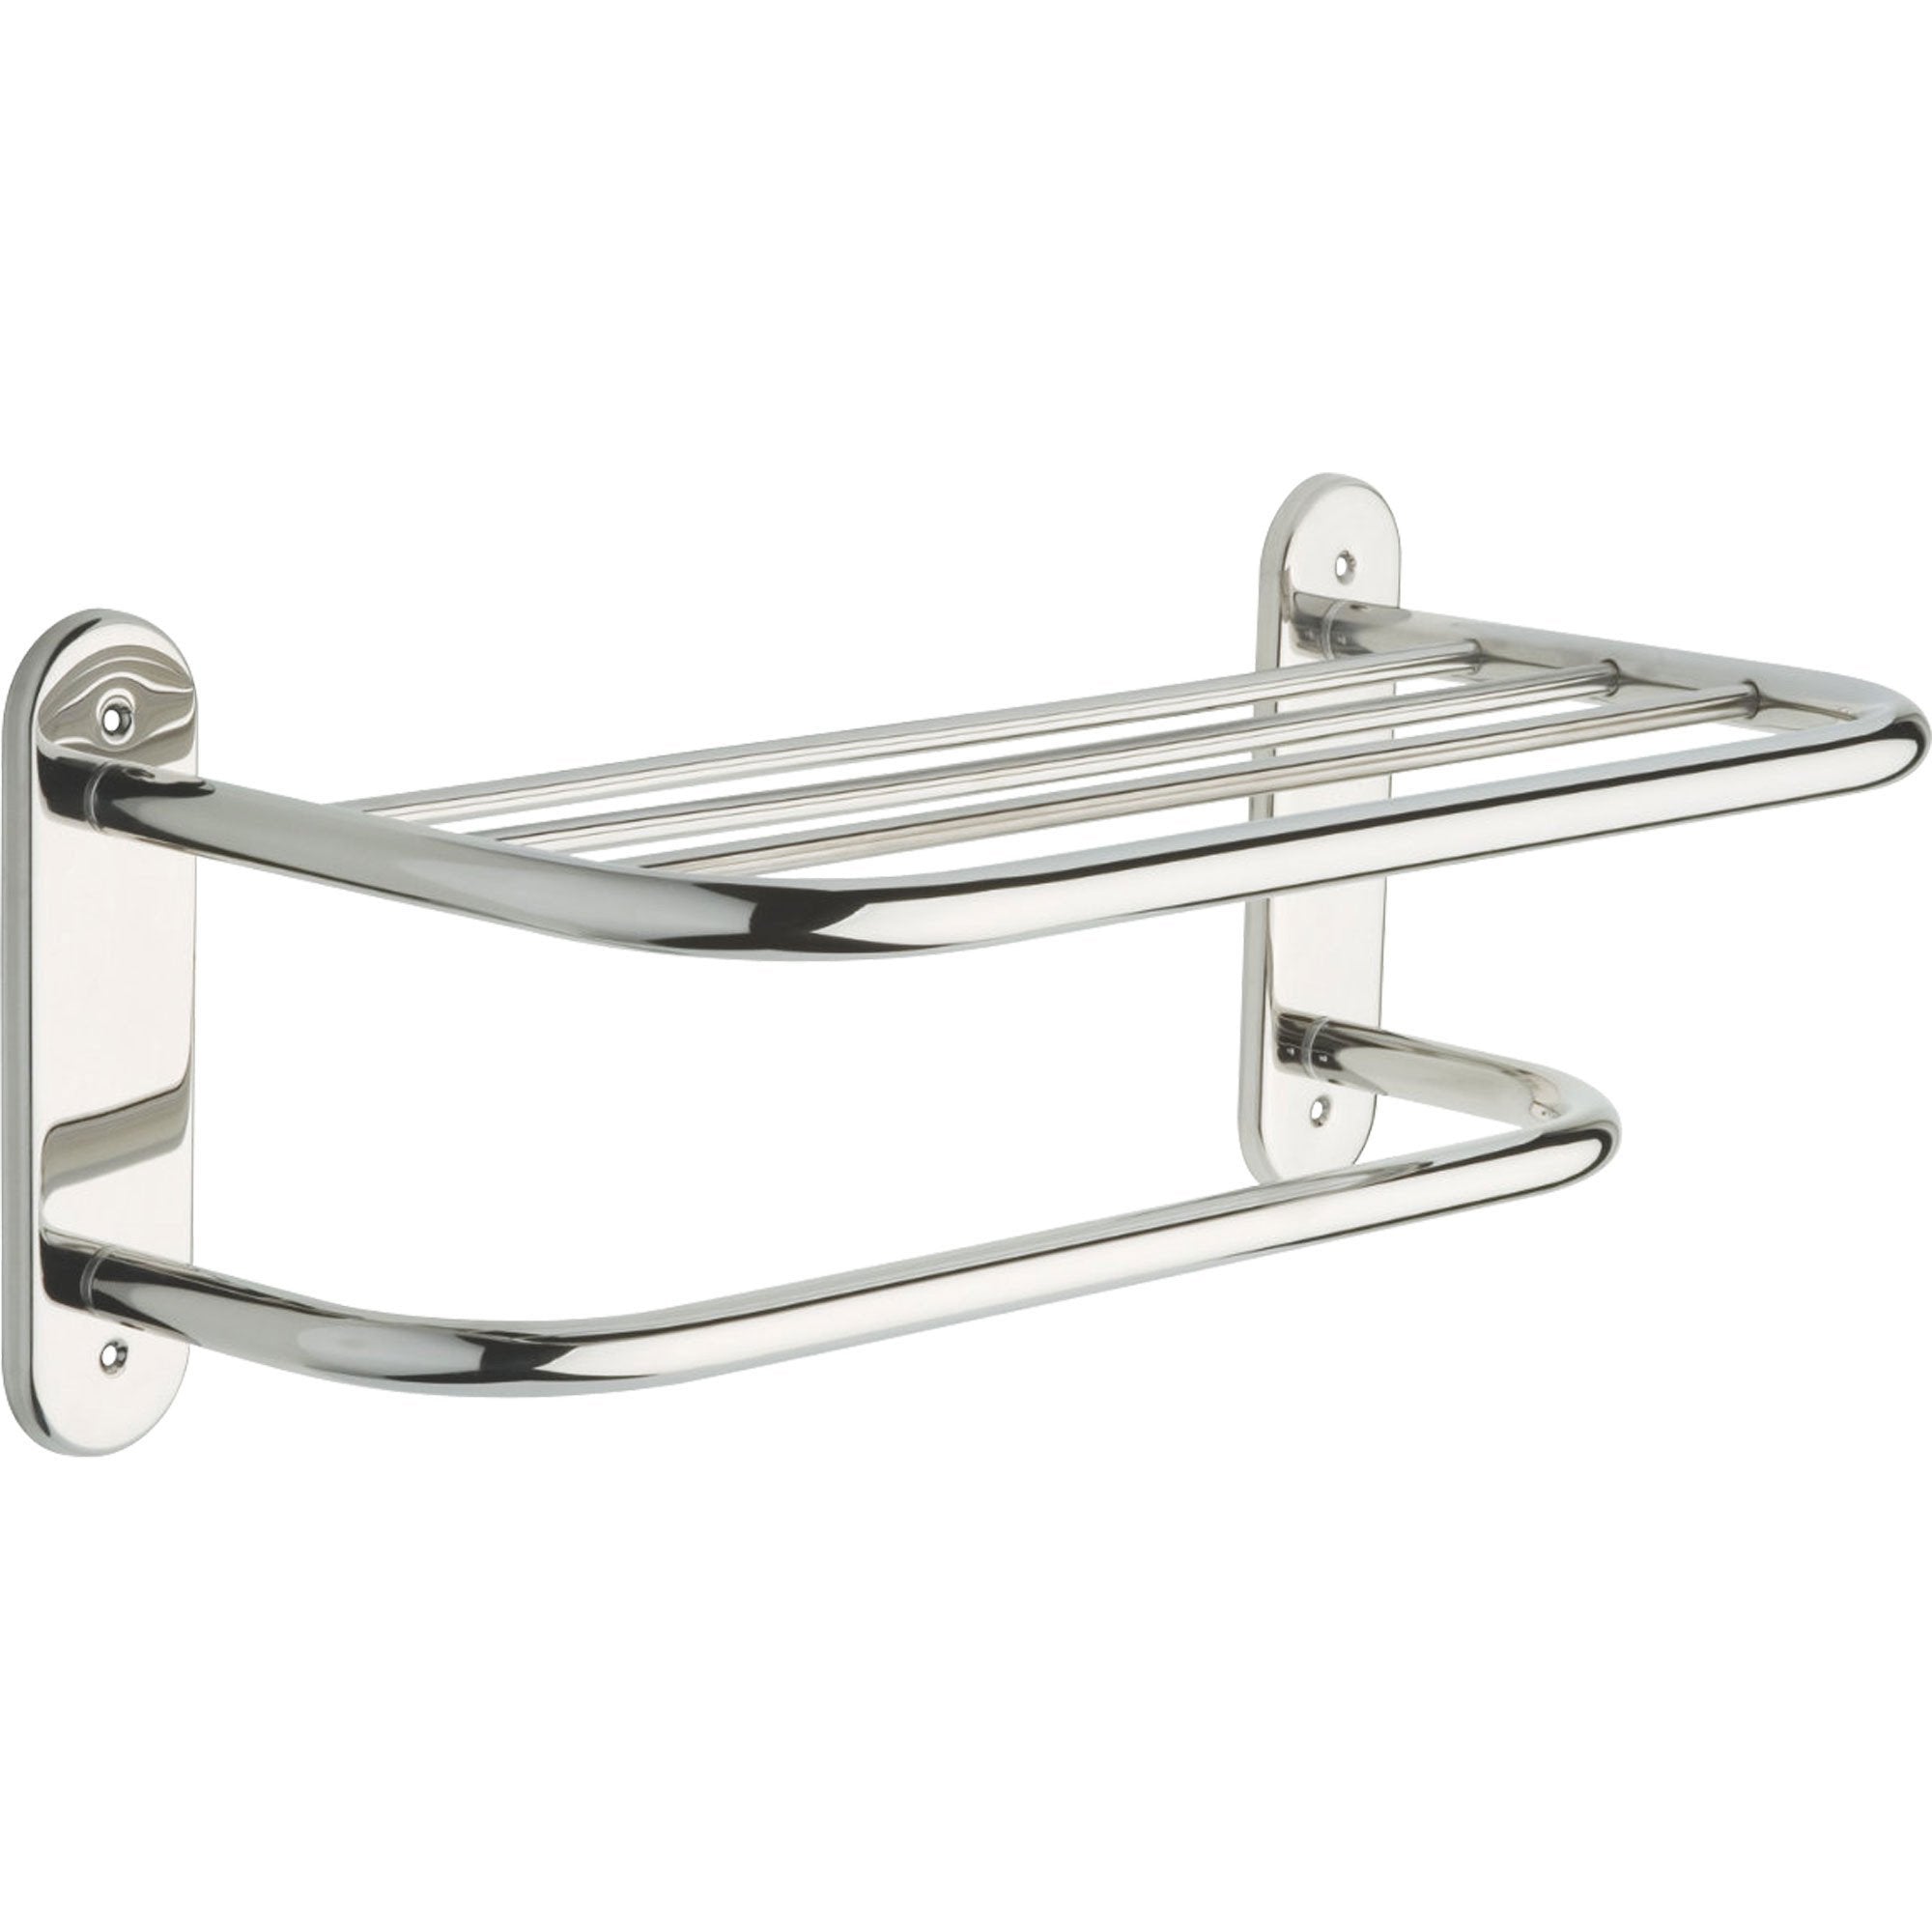 Delta Stainless Steel Finish 18 inch Bathroom Towel Bar with Shelf 572952